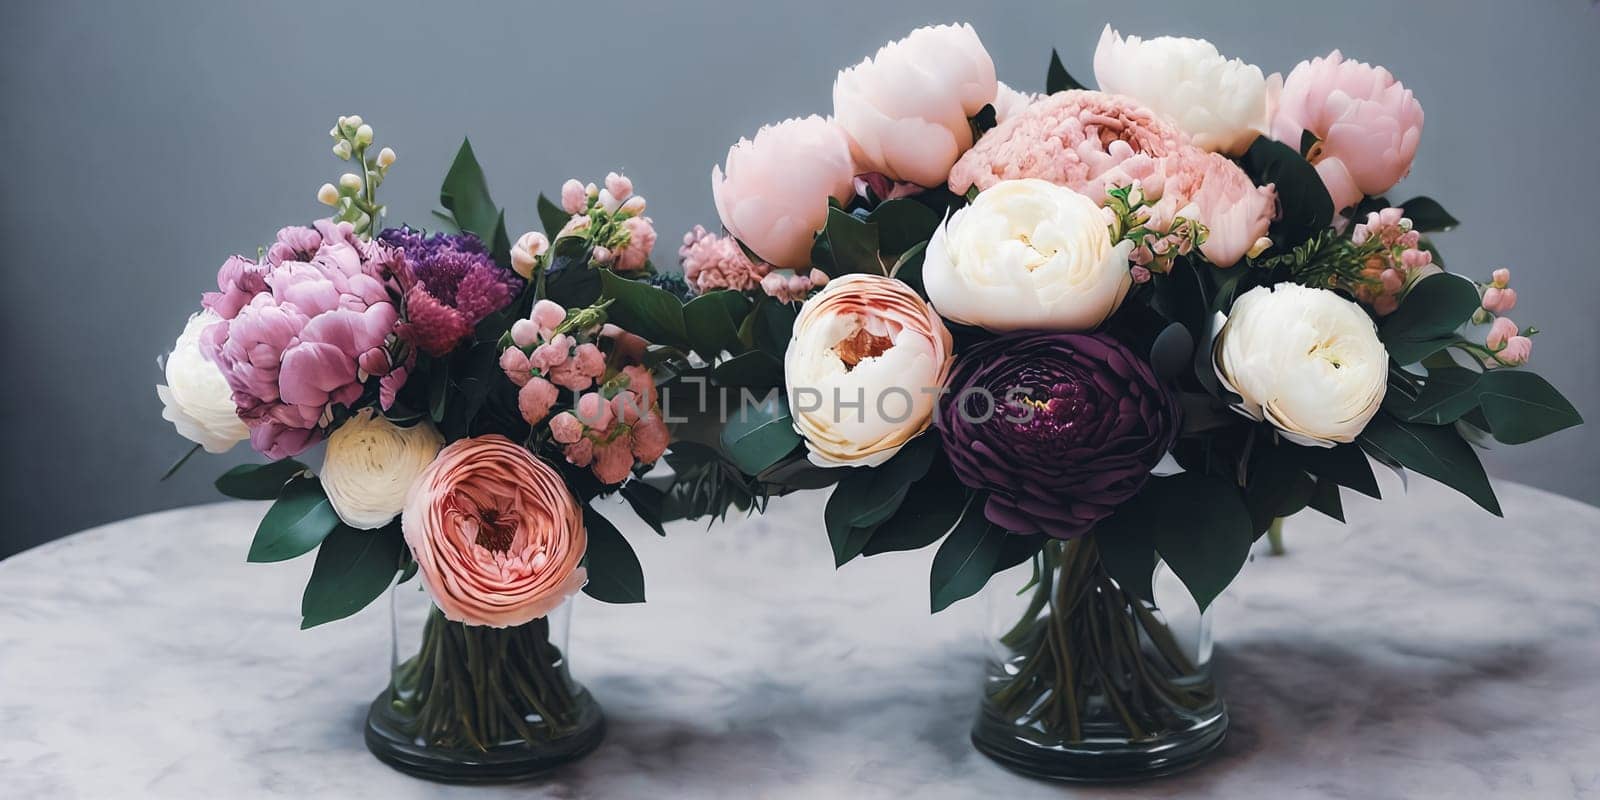 Sophisticated floral arrangement using a mix of different blooms such as peonies, hydrangeas, and ranunculus. Panorama